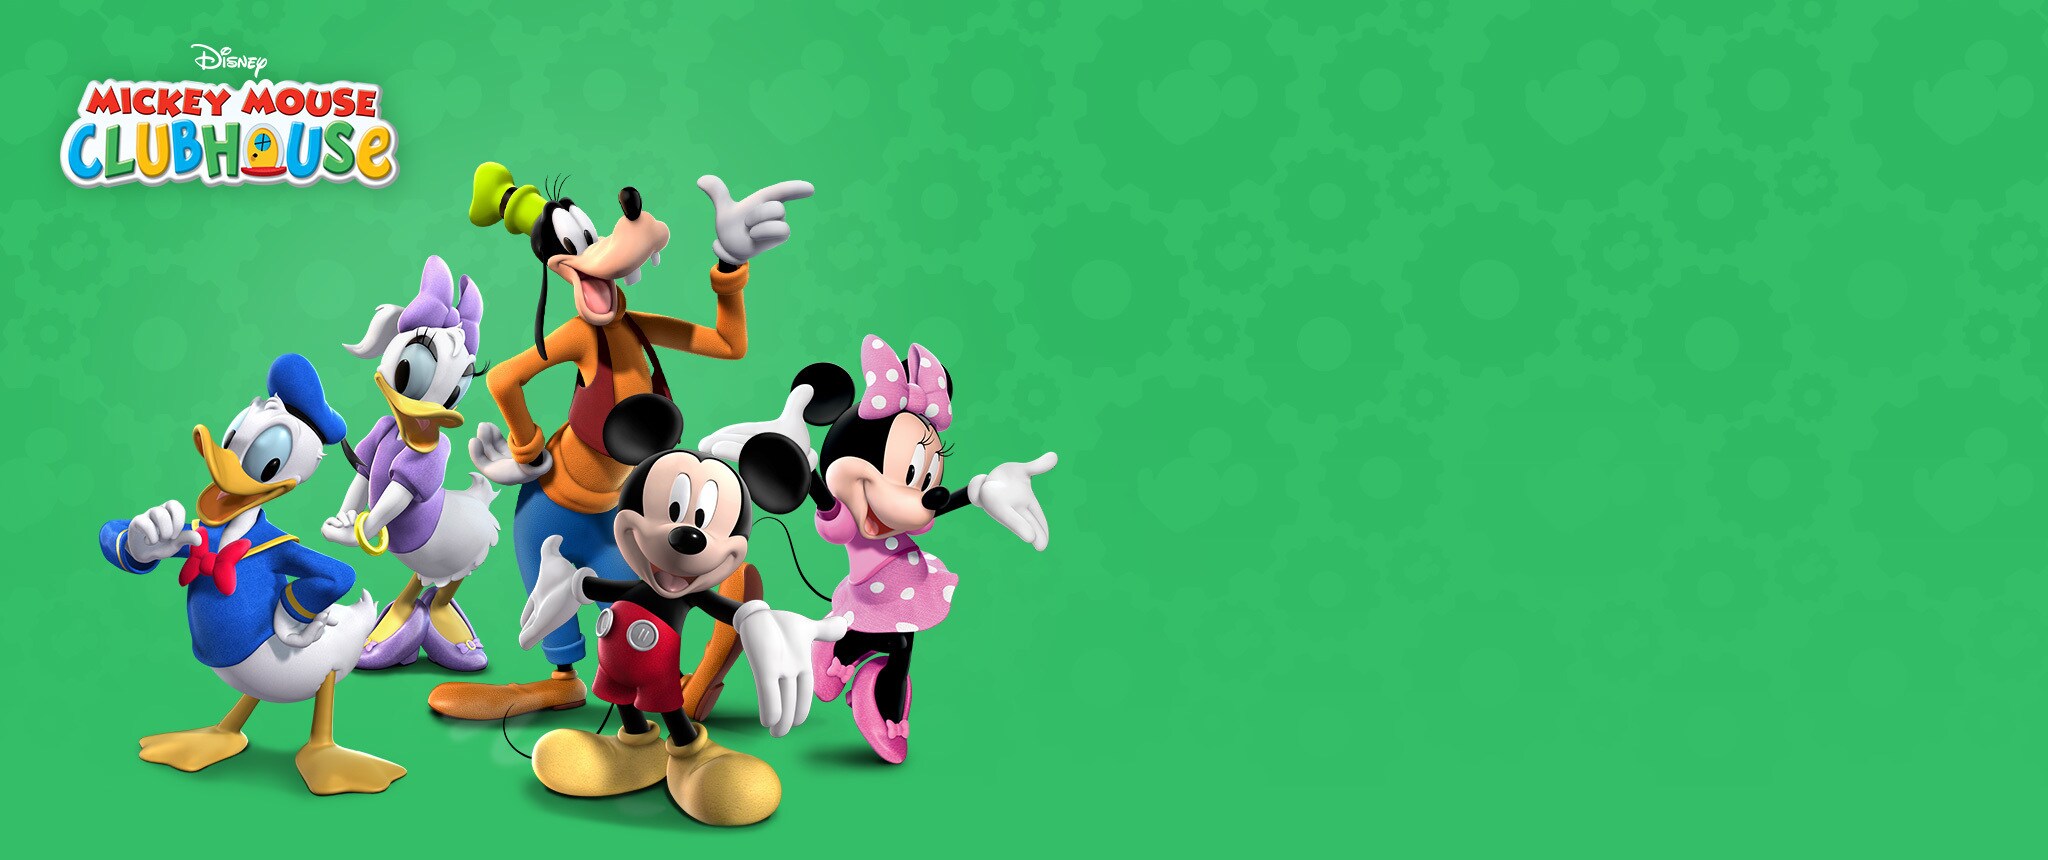 Mickey Mouse Clubhouse Disney Junior.